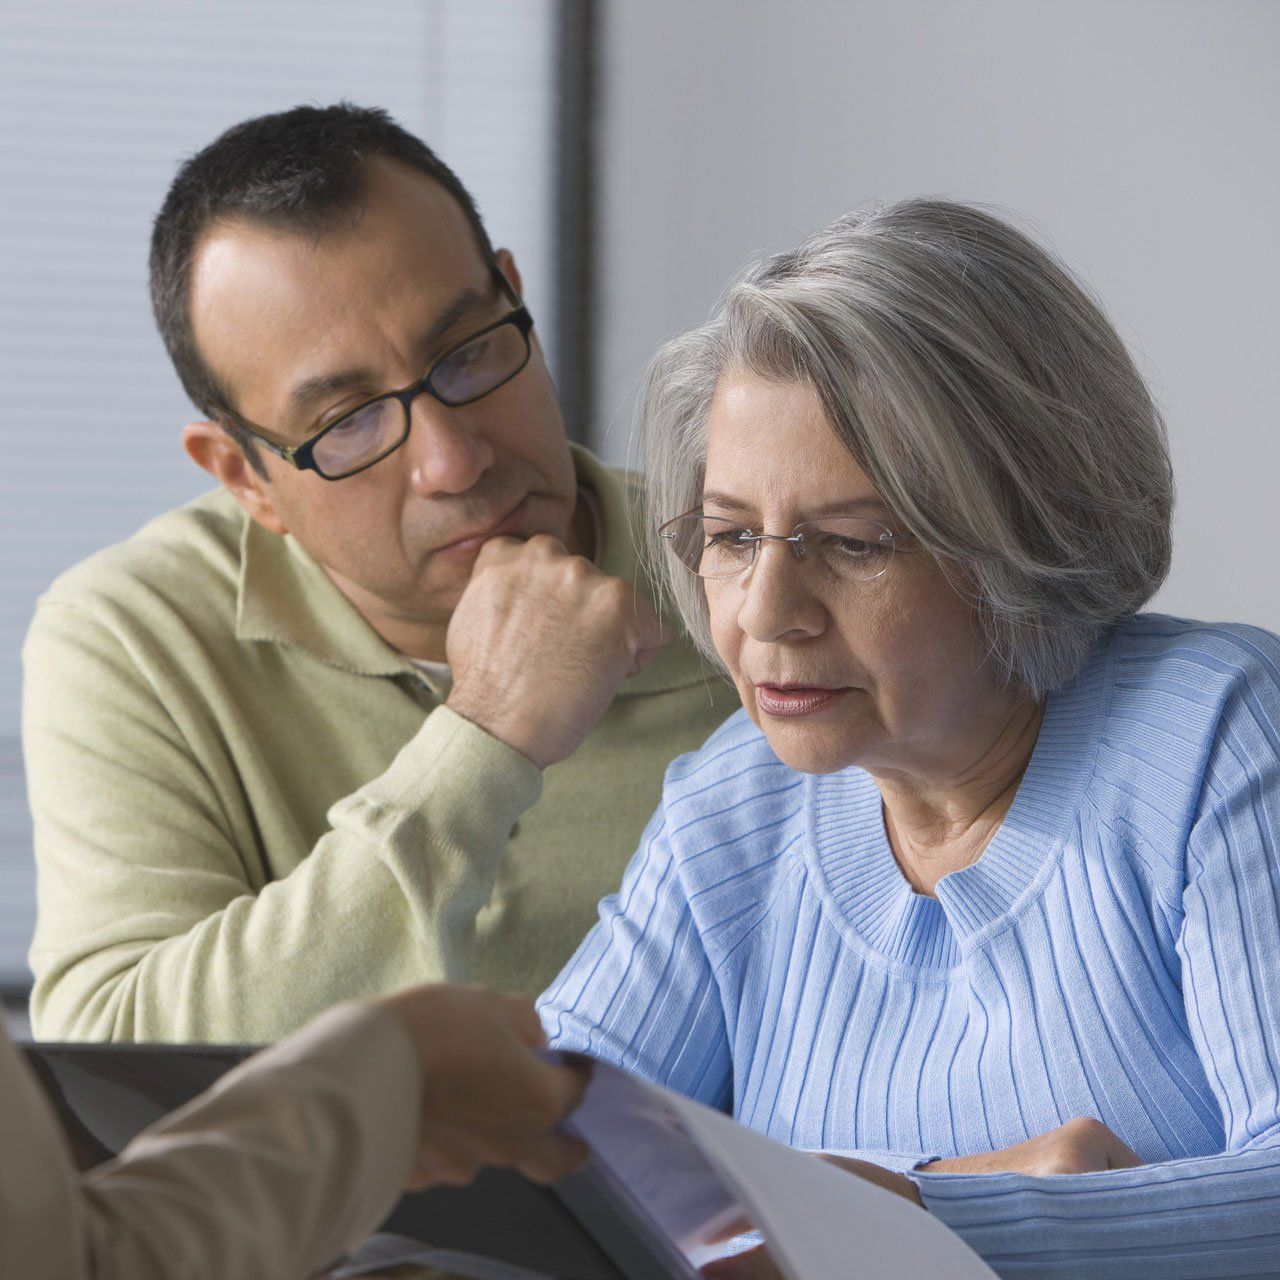 Hispanic man helping mother read Will contract